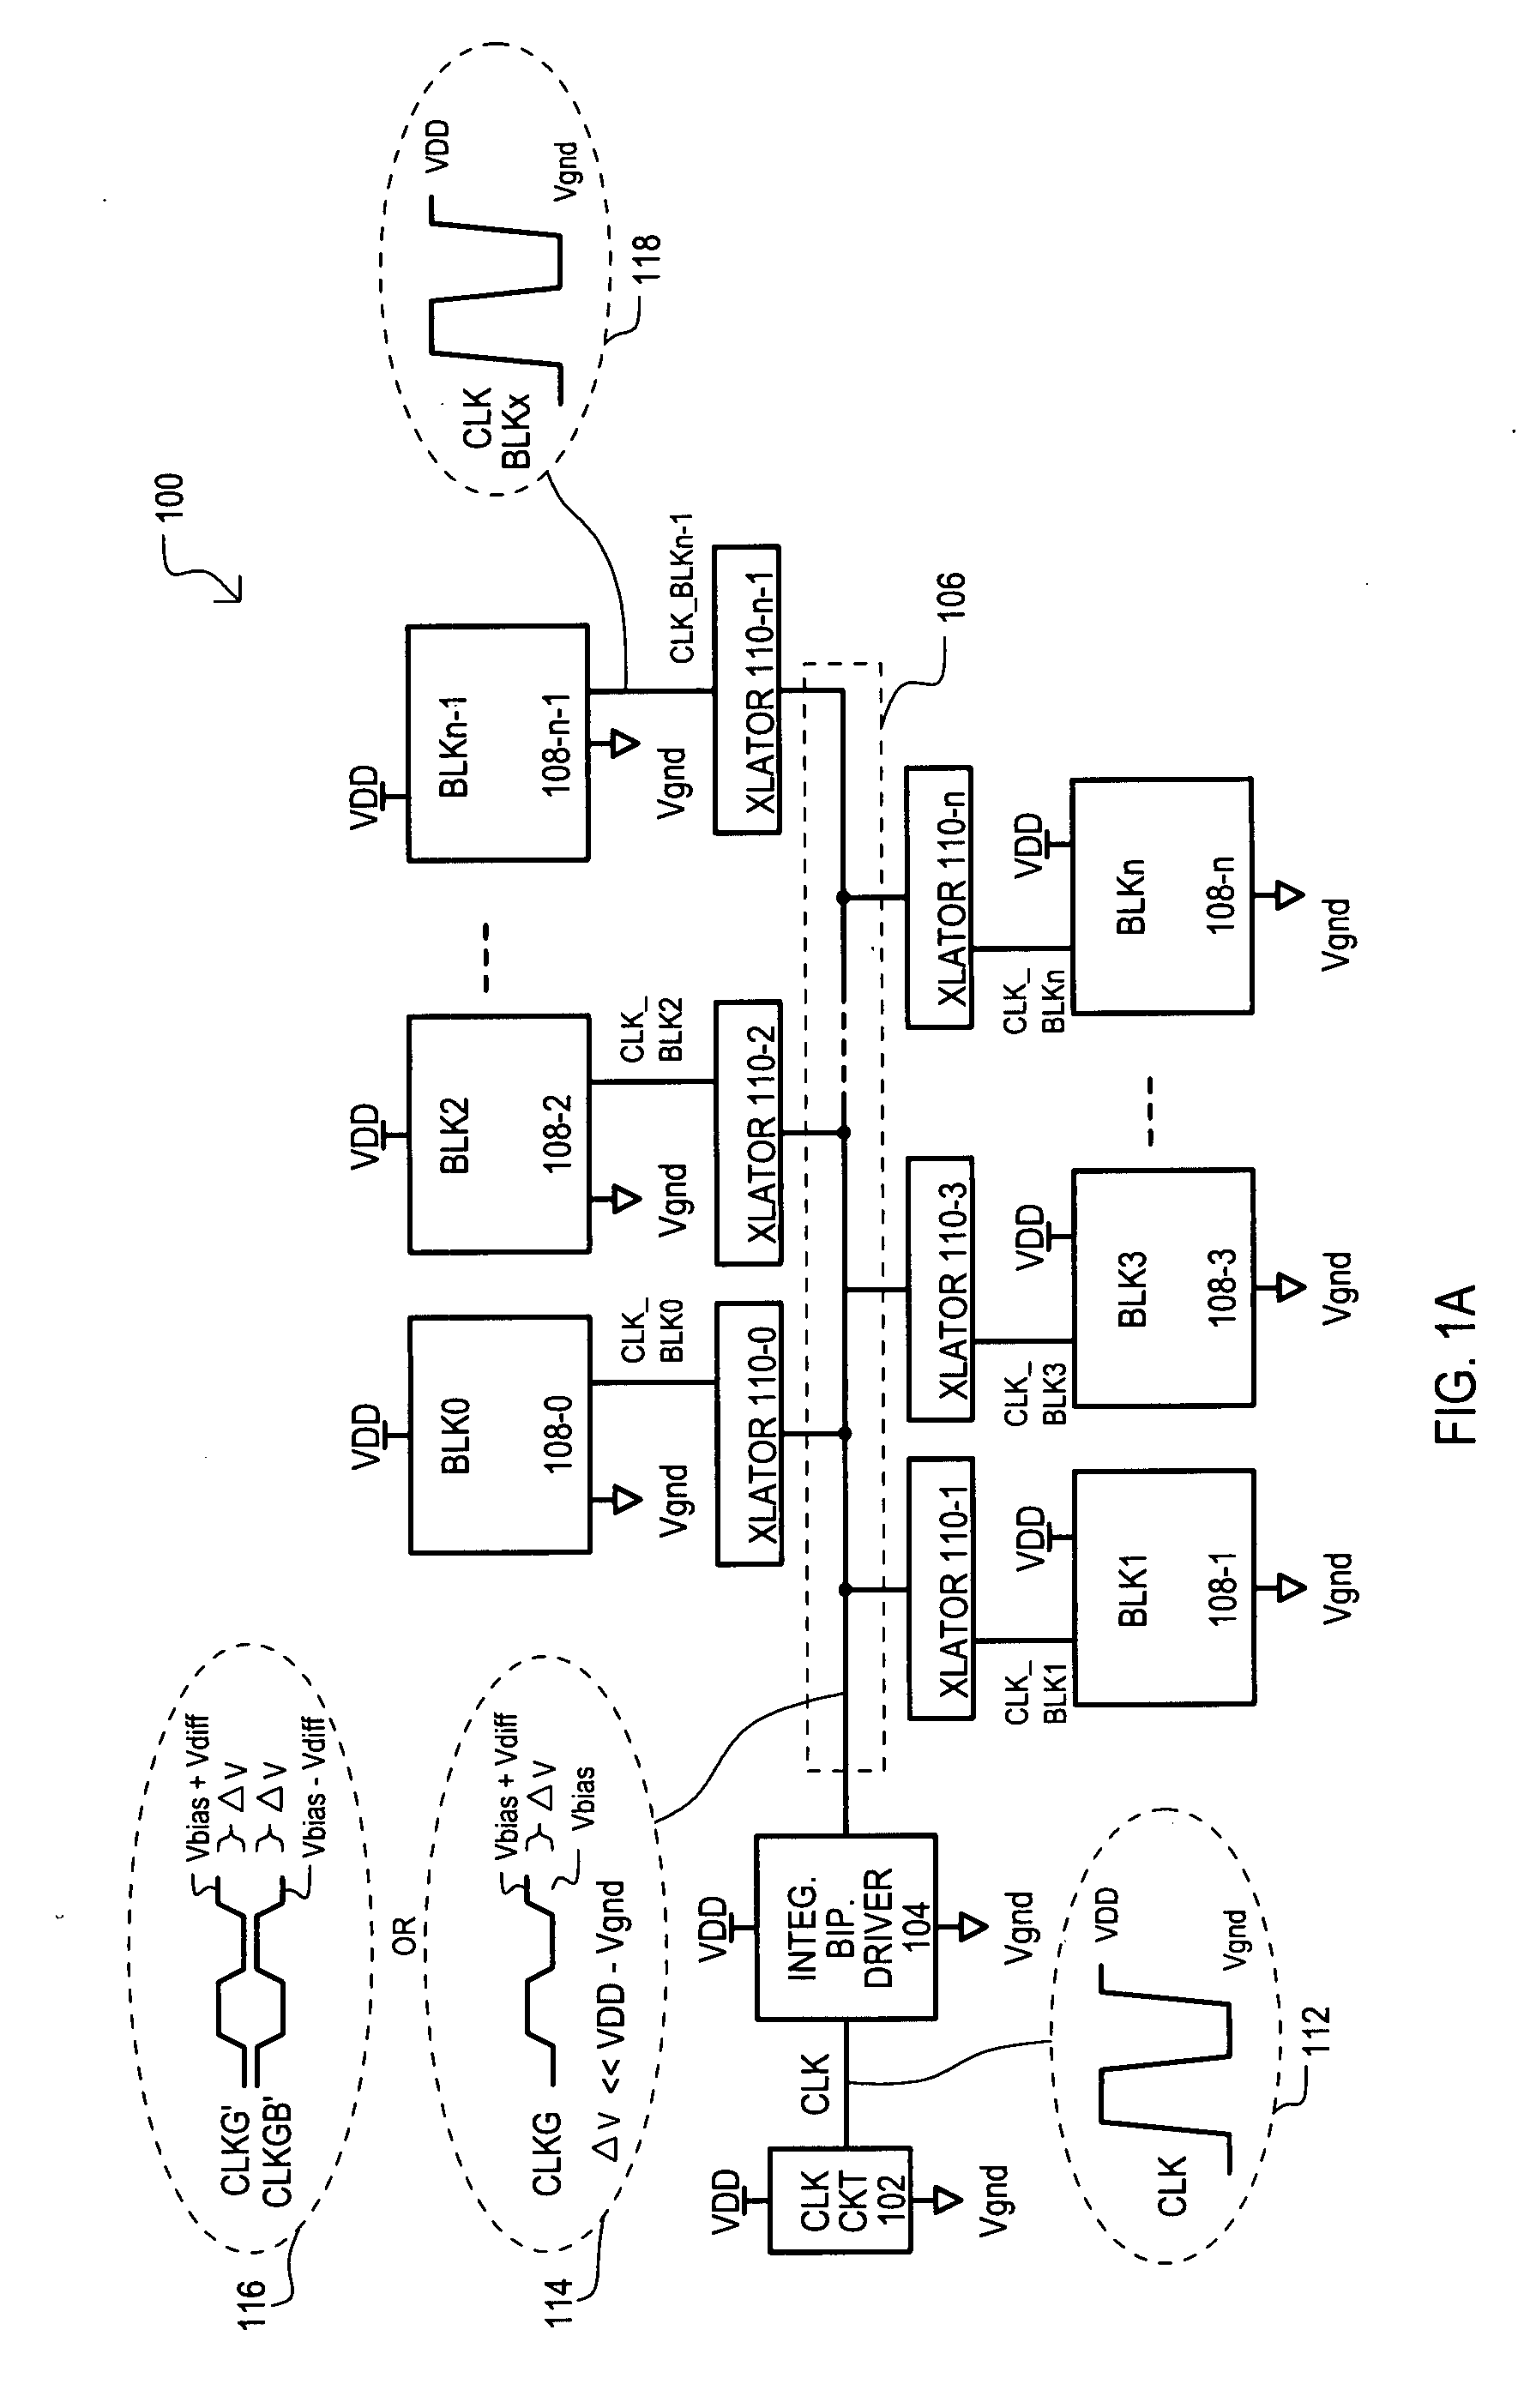 Signaling circuit and method for integrated circuit devices and systems